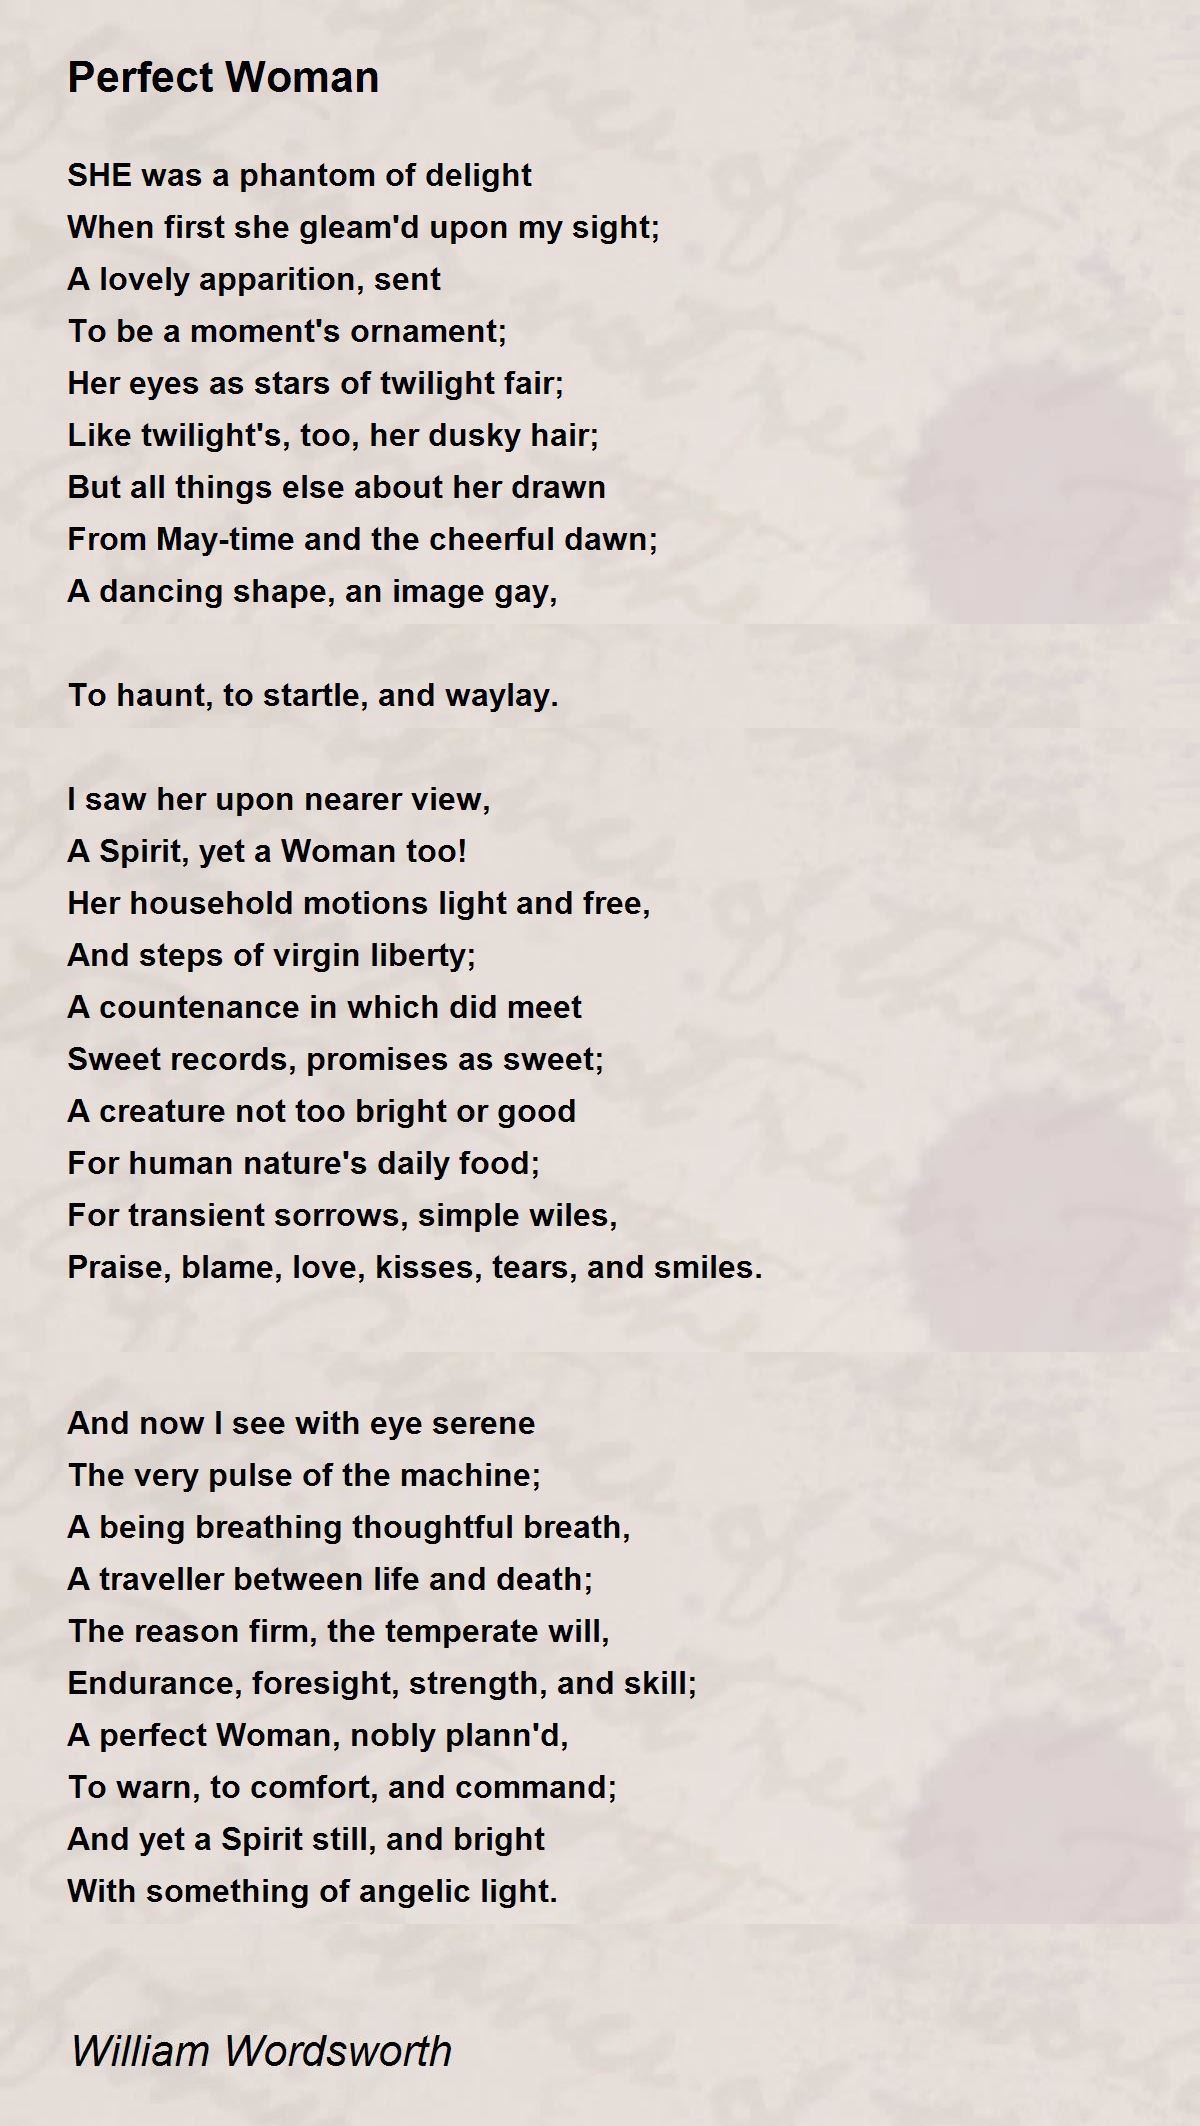 Perfect Woman Poem by William Wordsworth - Poem Hunter Comments